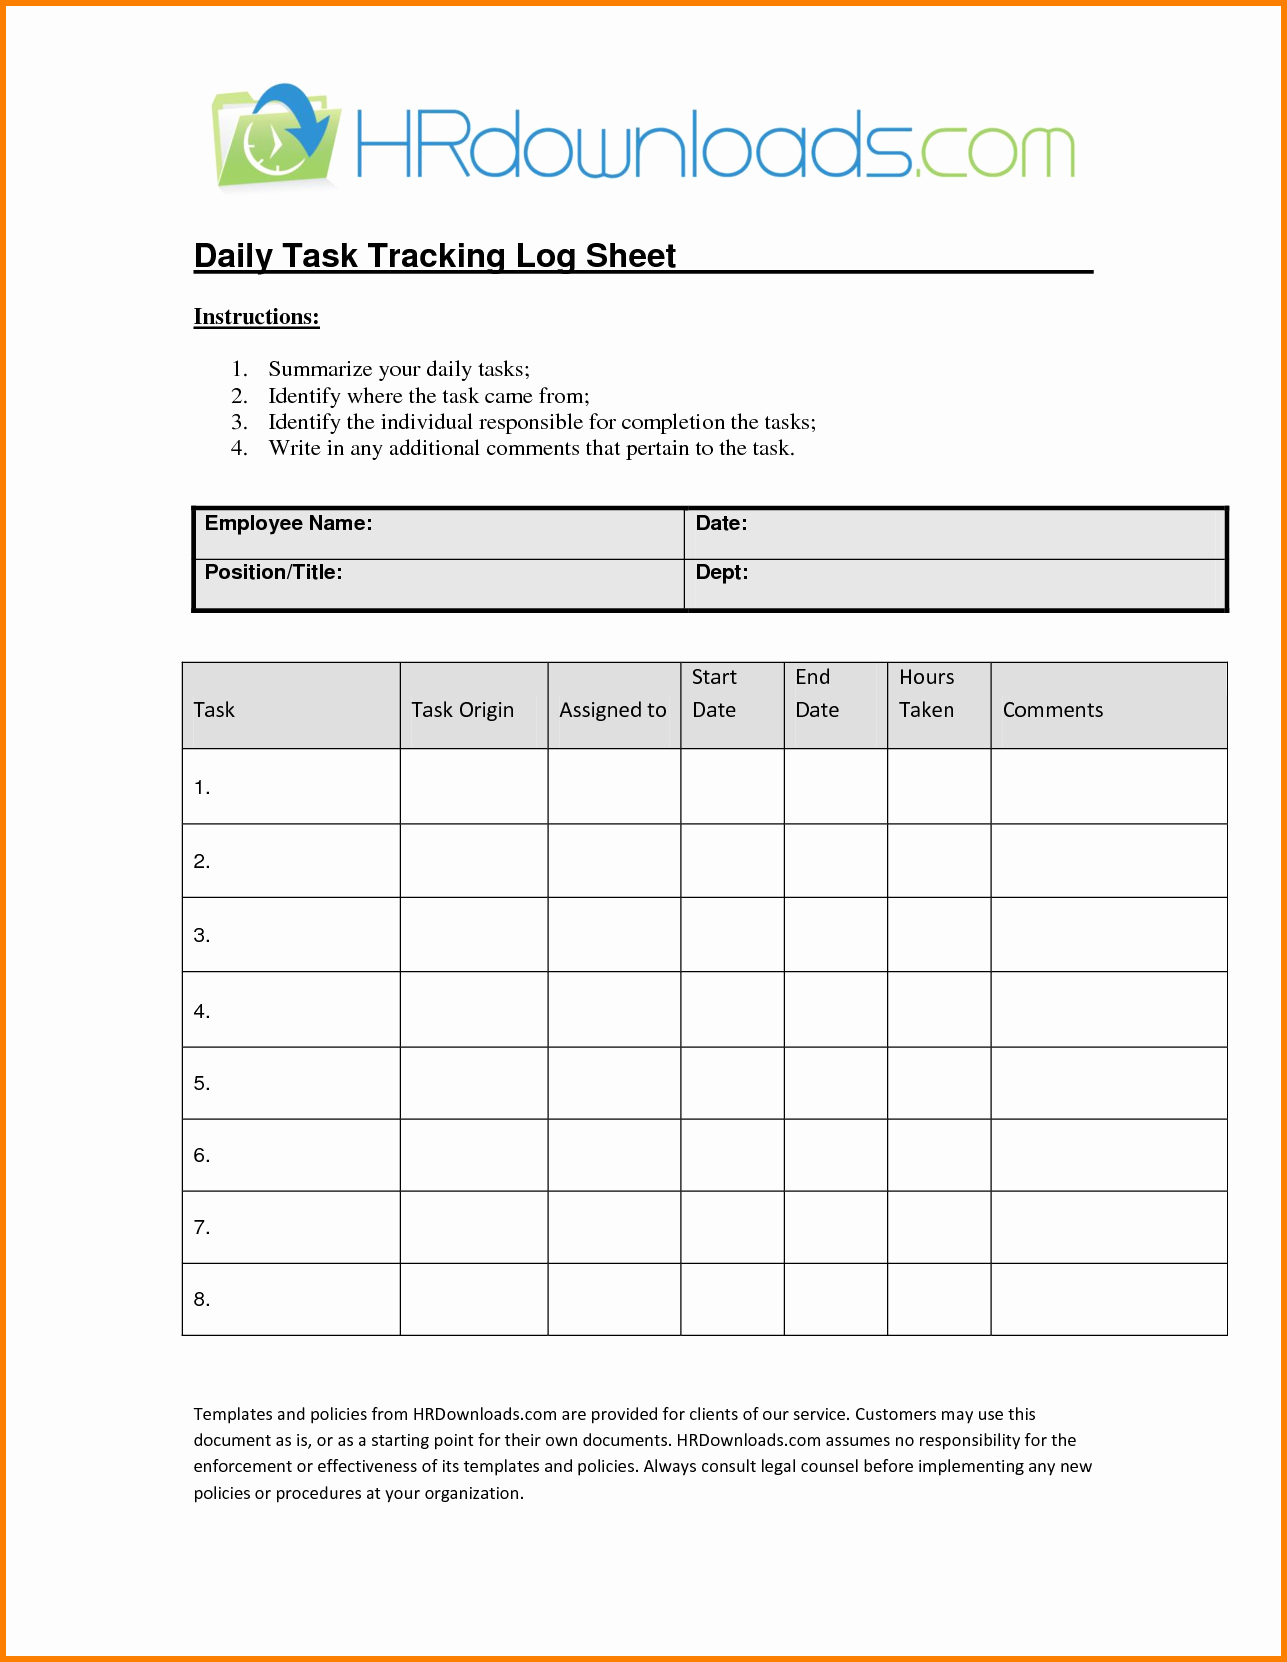 Daily Log Sheet Template Free Awesome Daily Task Sheet for Employee